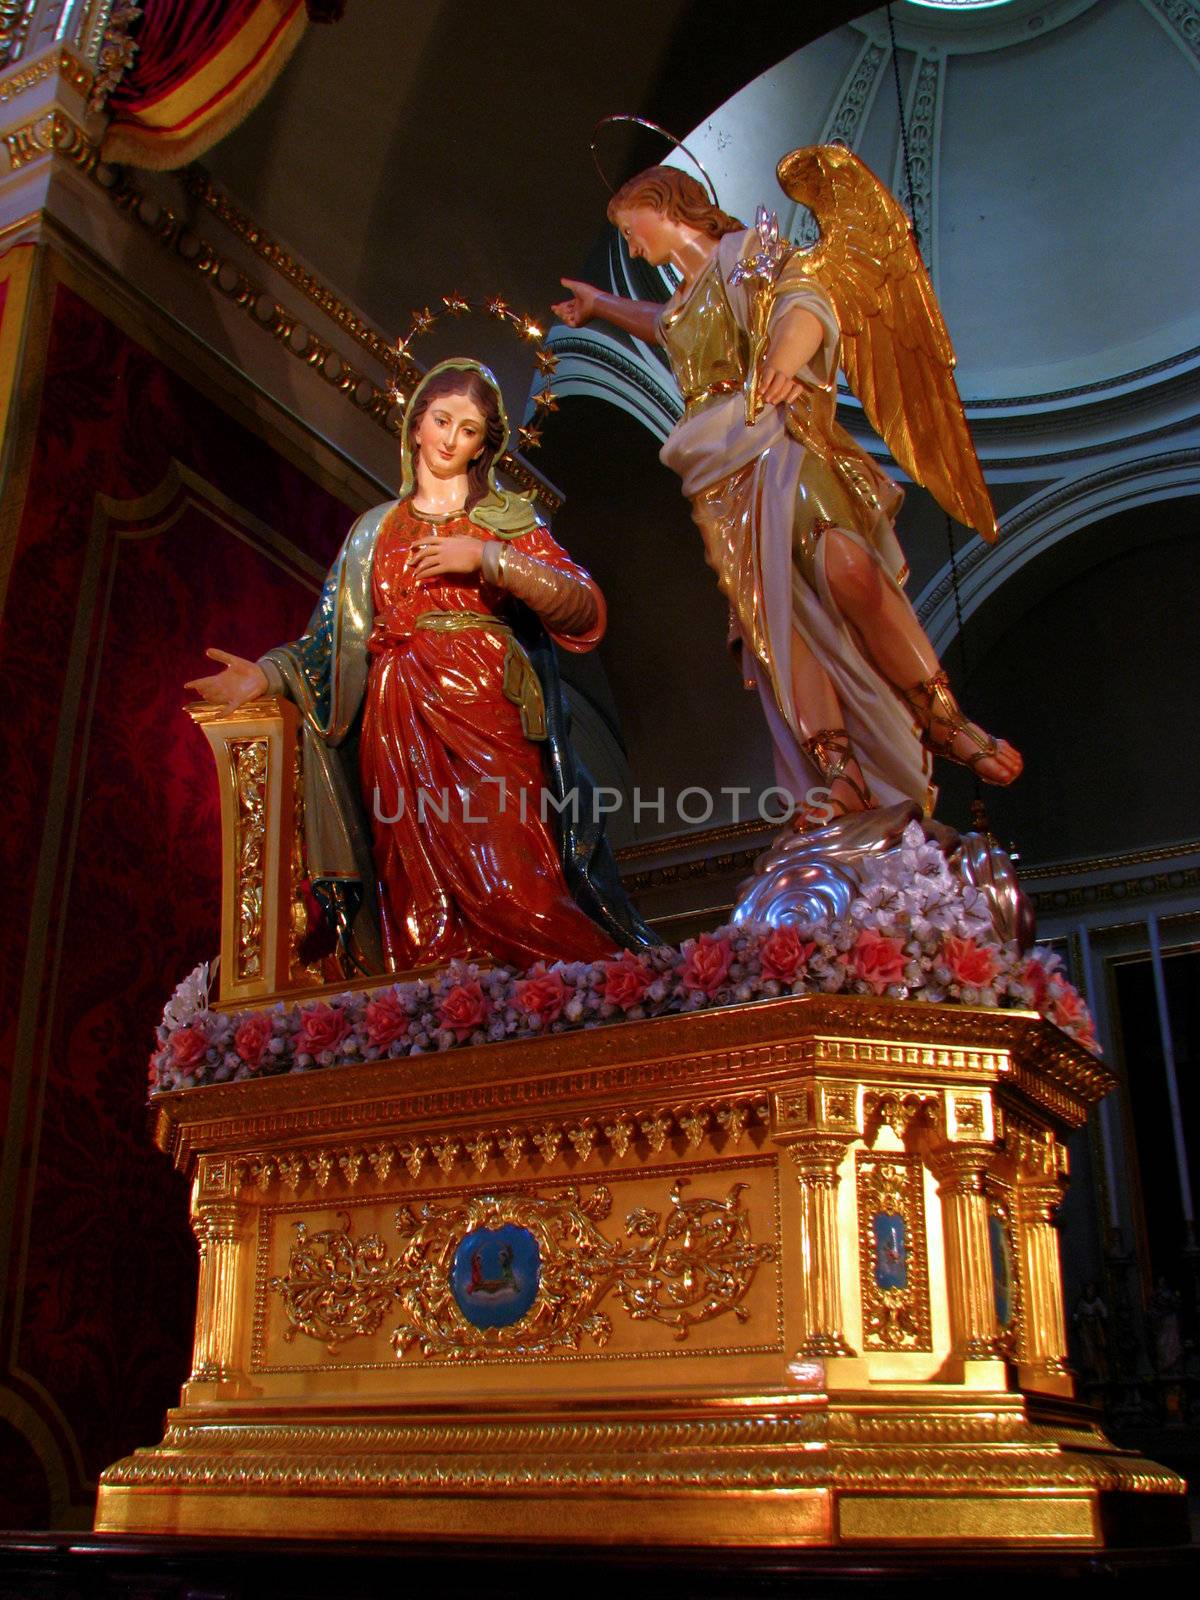 The statue of The Annunciation of Our Lord Jesus to The Blessed Virgin Mary by the Angel Gabriel displayed in Tarxien, Malta.